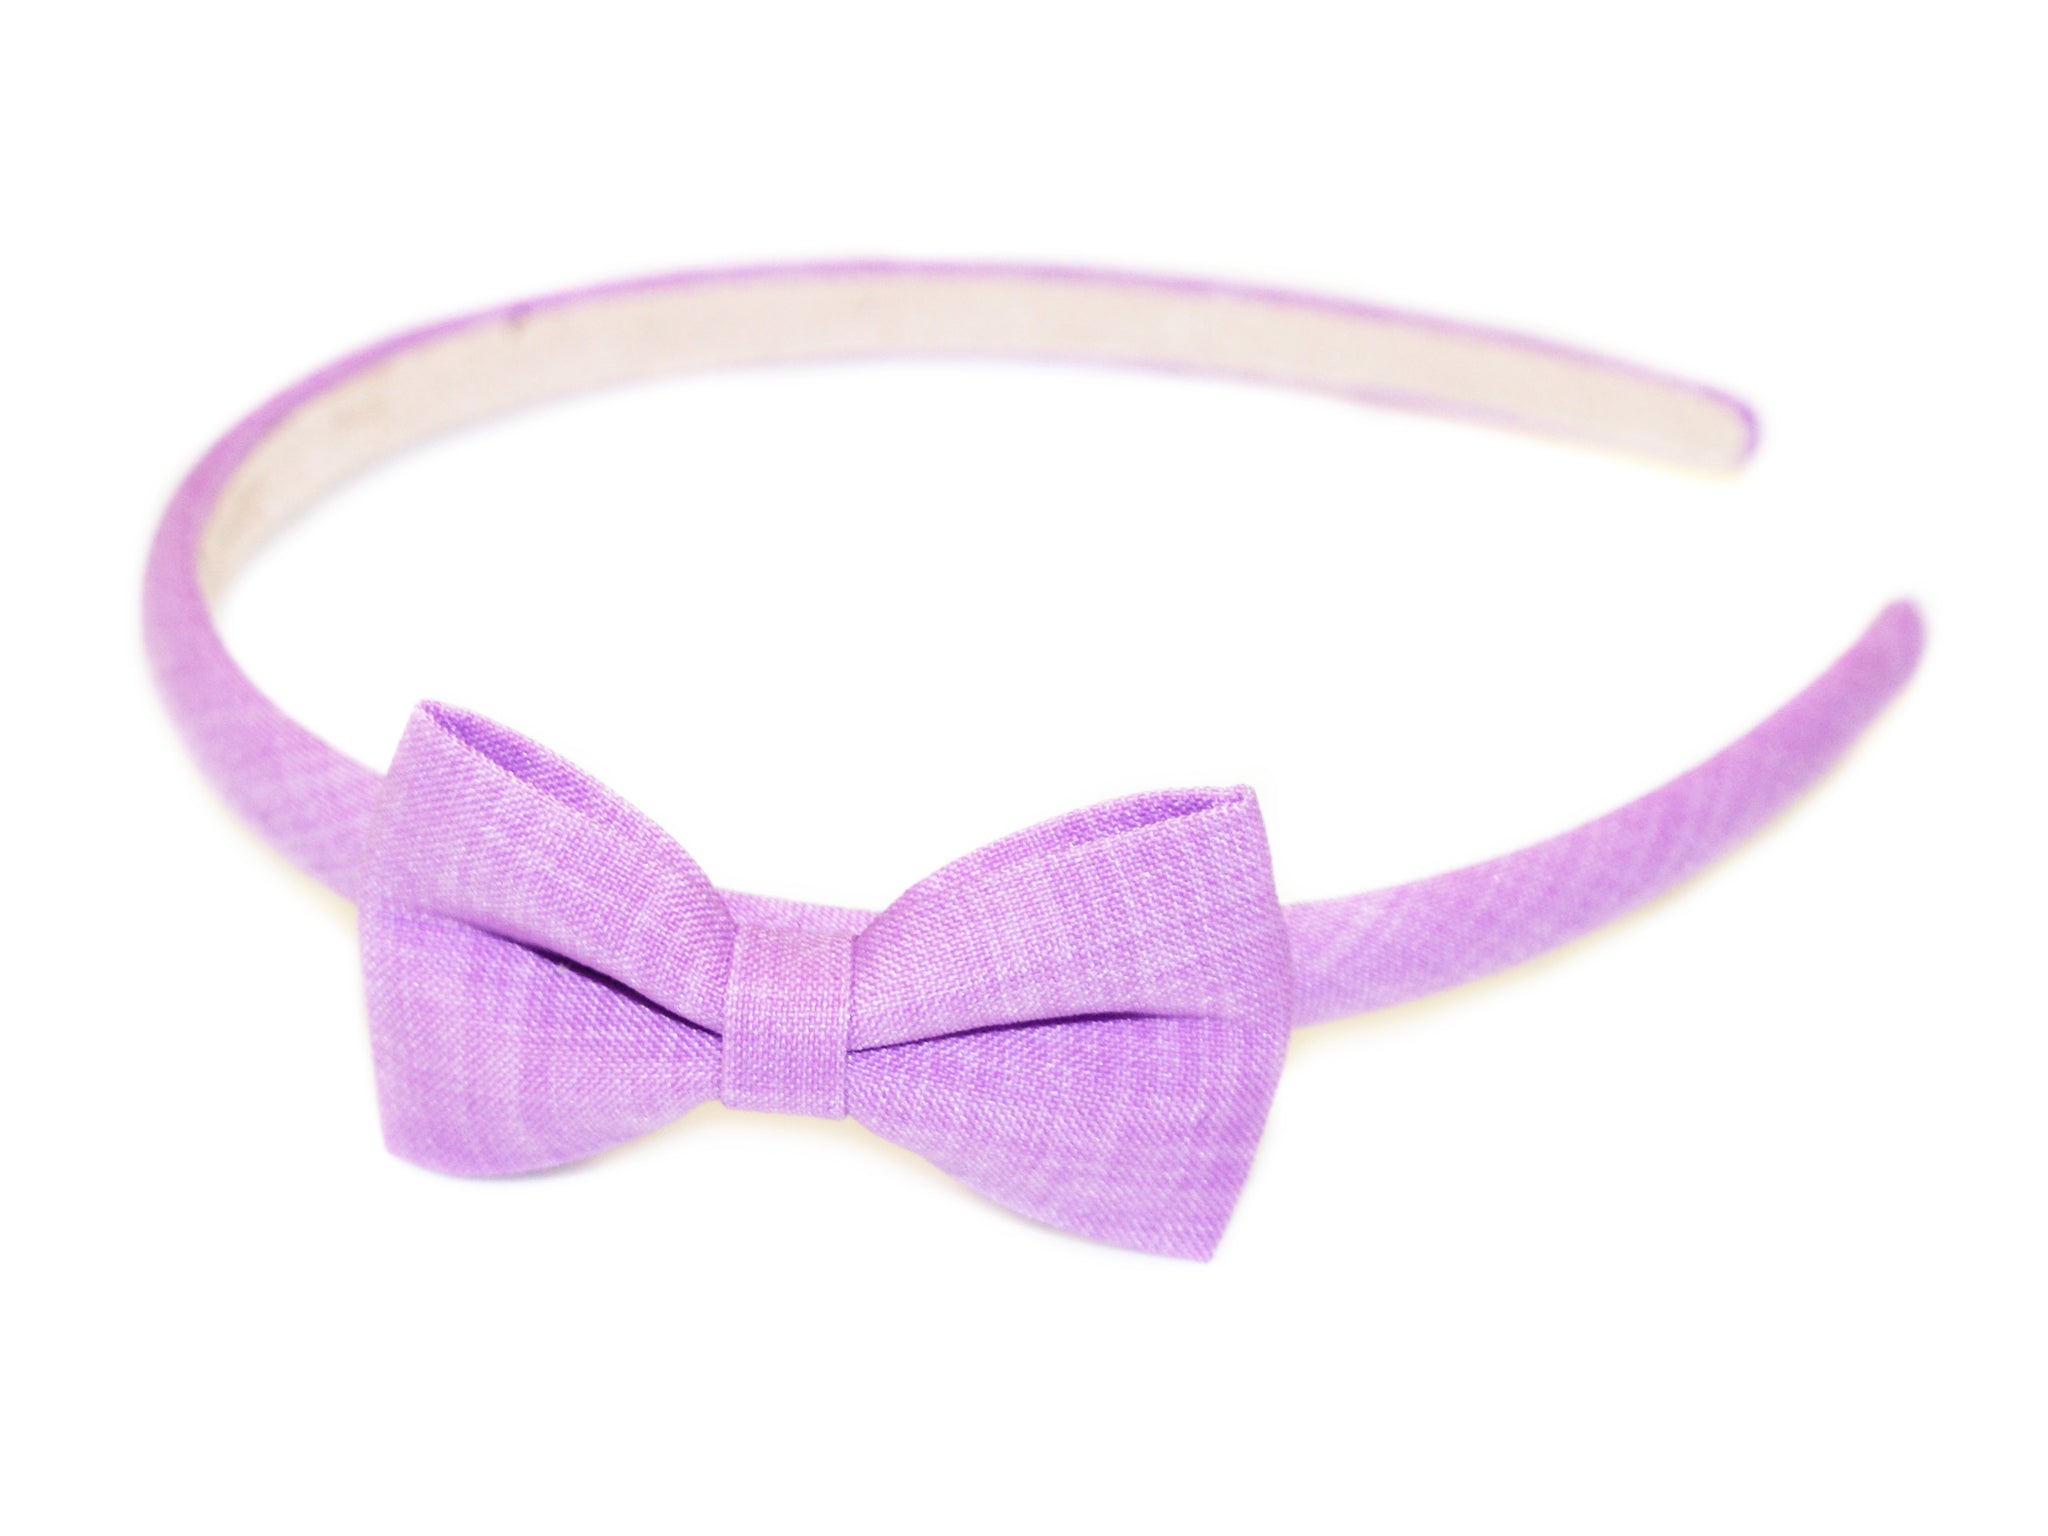 Linen Bow Alice Band - Lilac